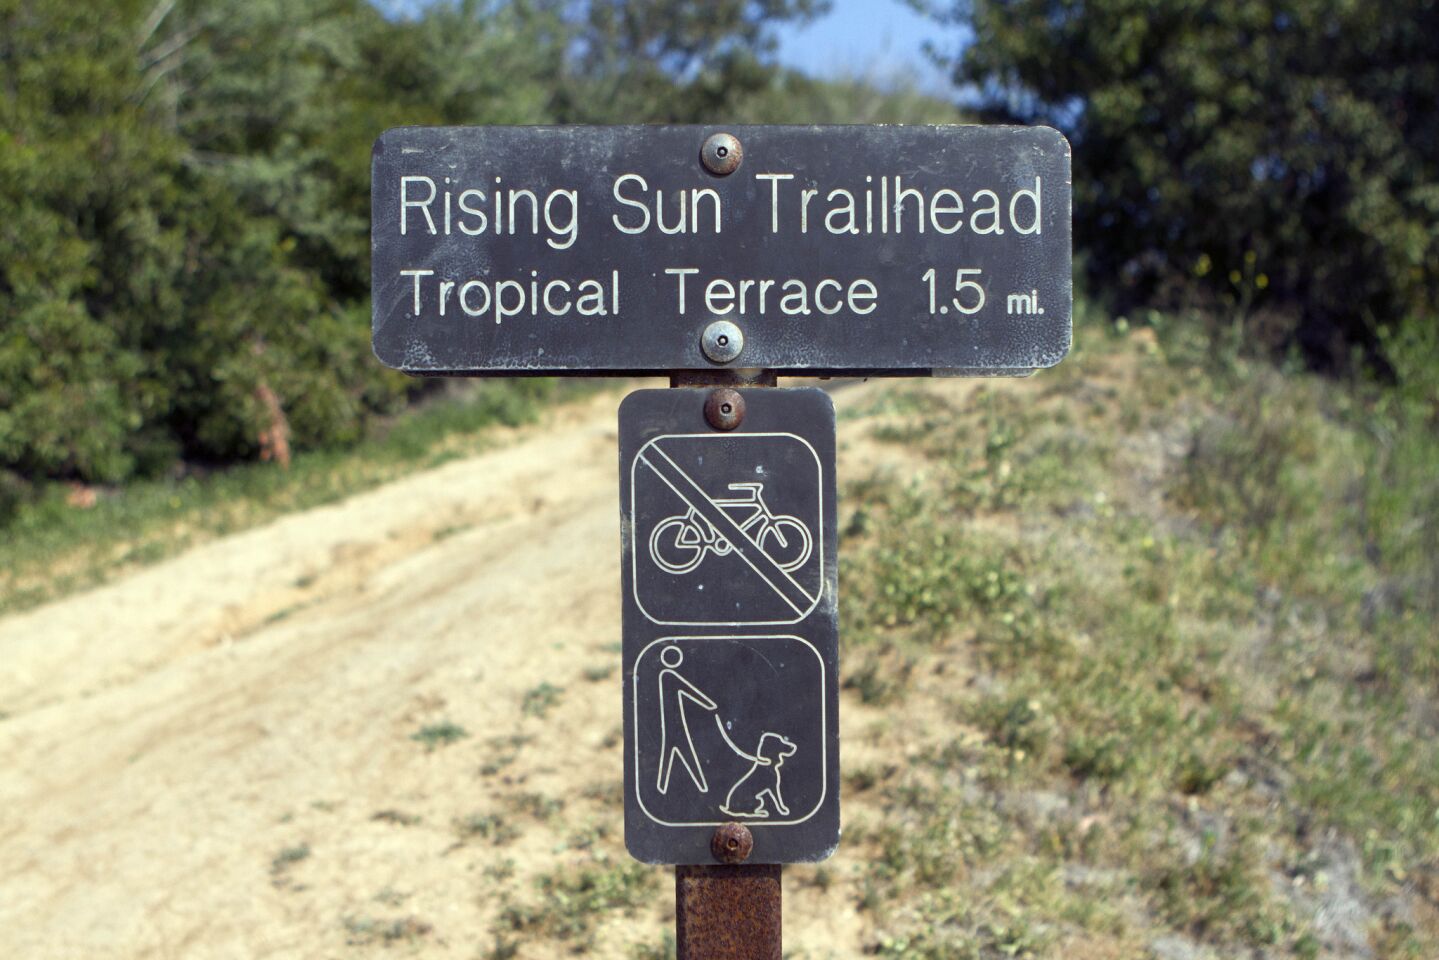 On the TRW Trail, follow signs that lead to the Rising Sun Trail. Cross over a paved road before climbing the ridge on the Rising Sun Trail's dirt pathway.